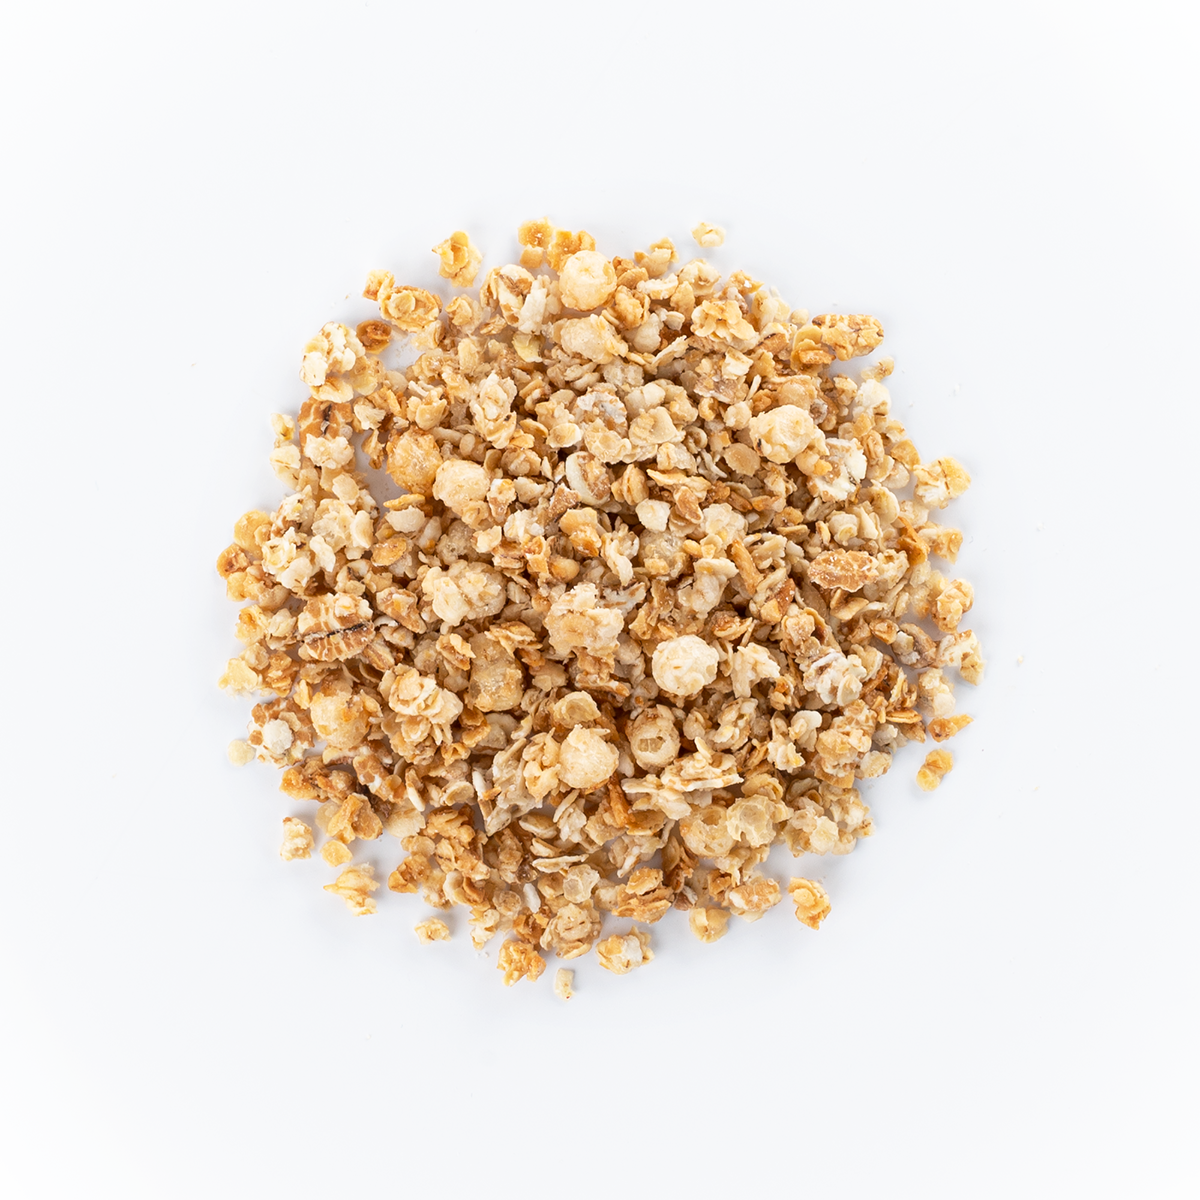 Granola – cereal flakes and crisps